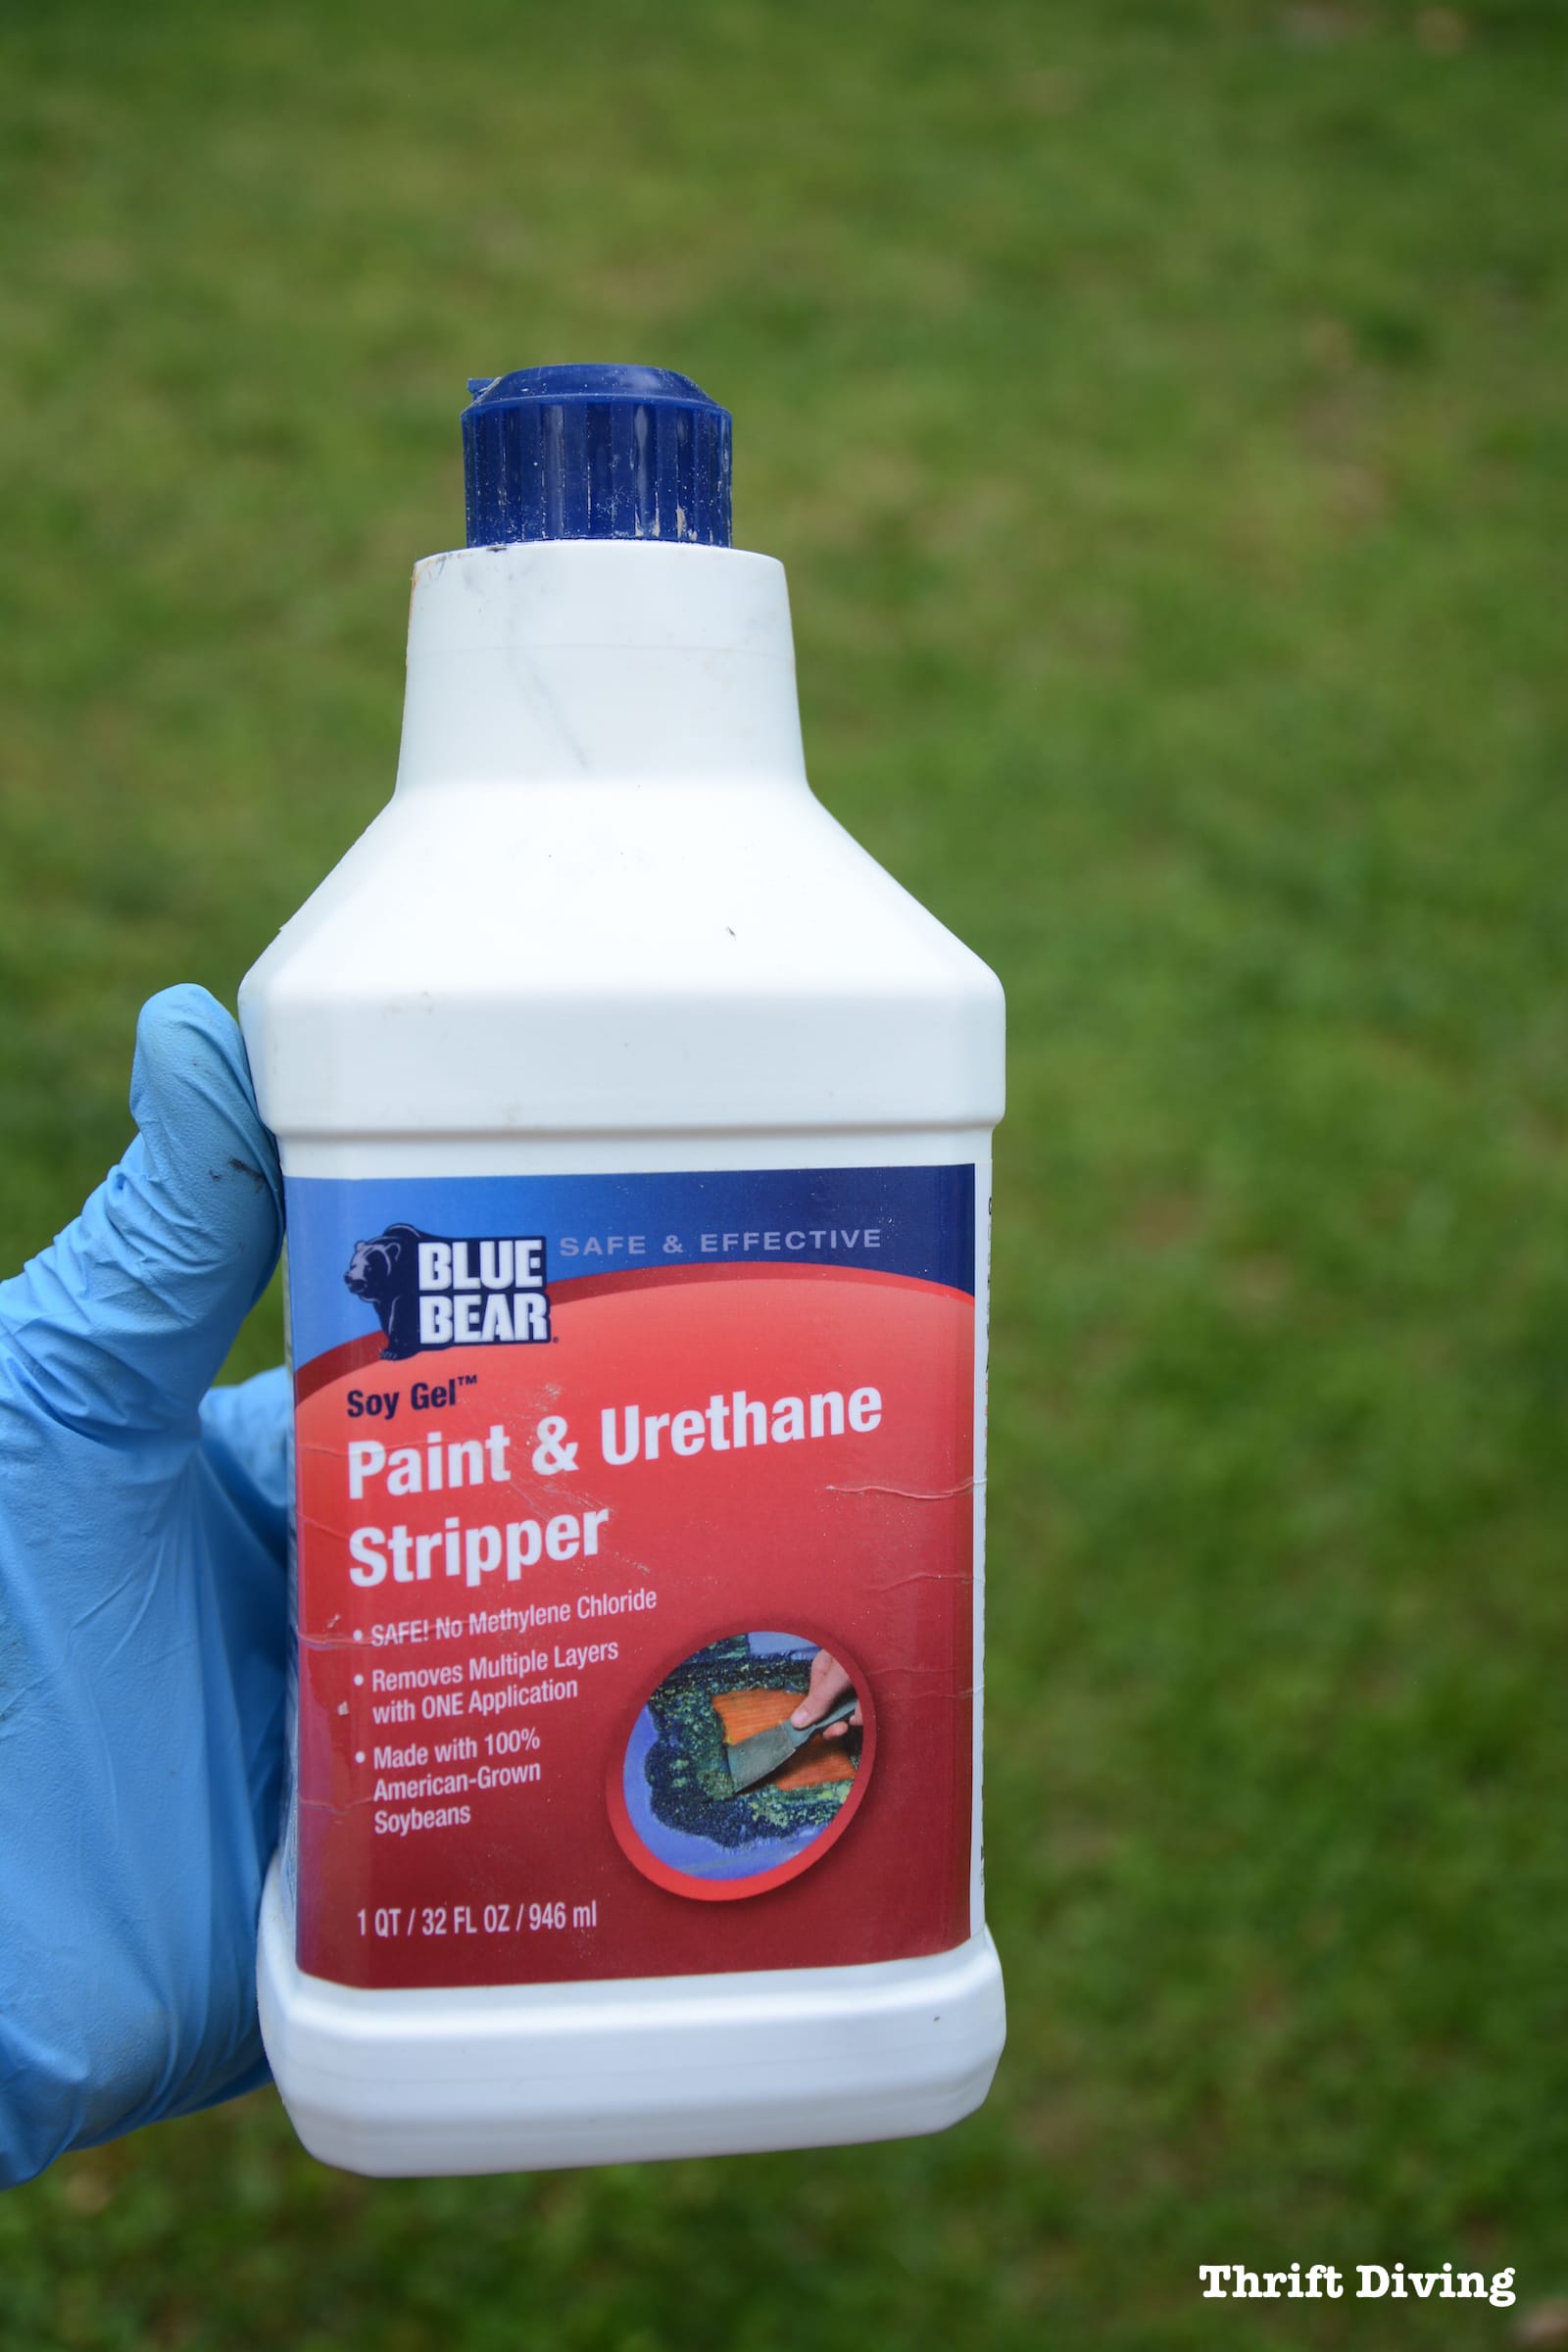 Blue Bear soy gel paint and urethan stripper for environmentally-friendly stripping